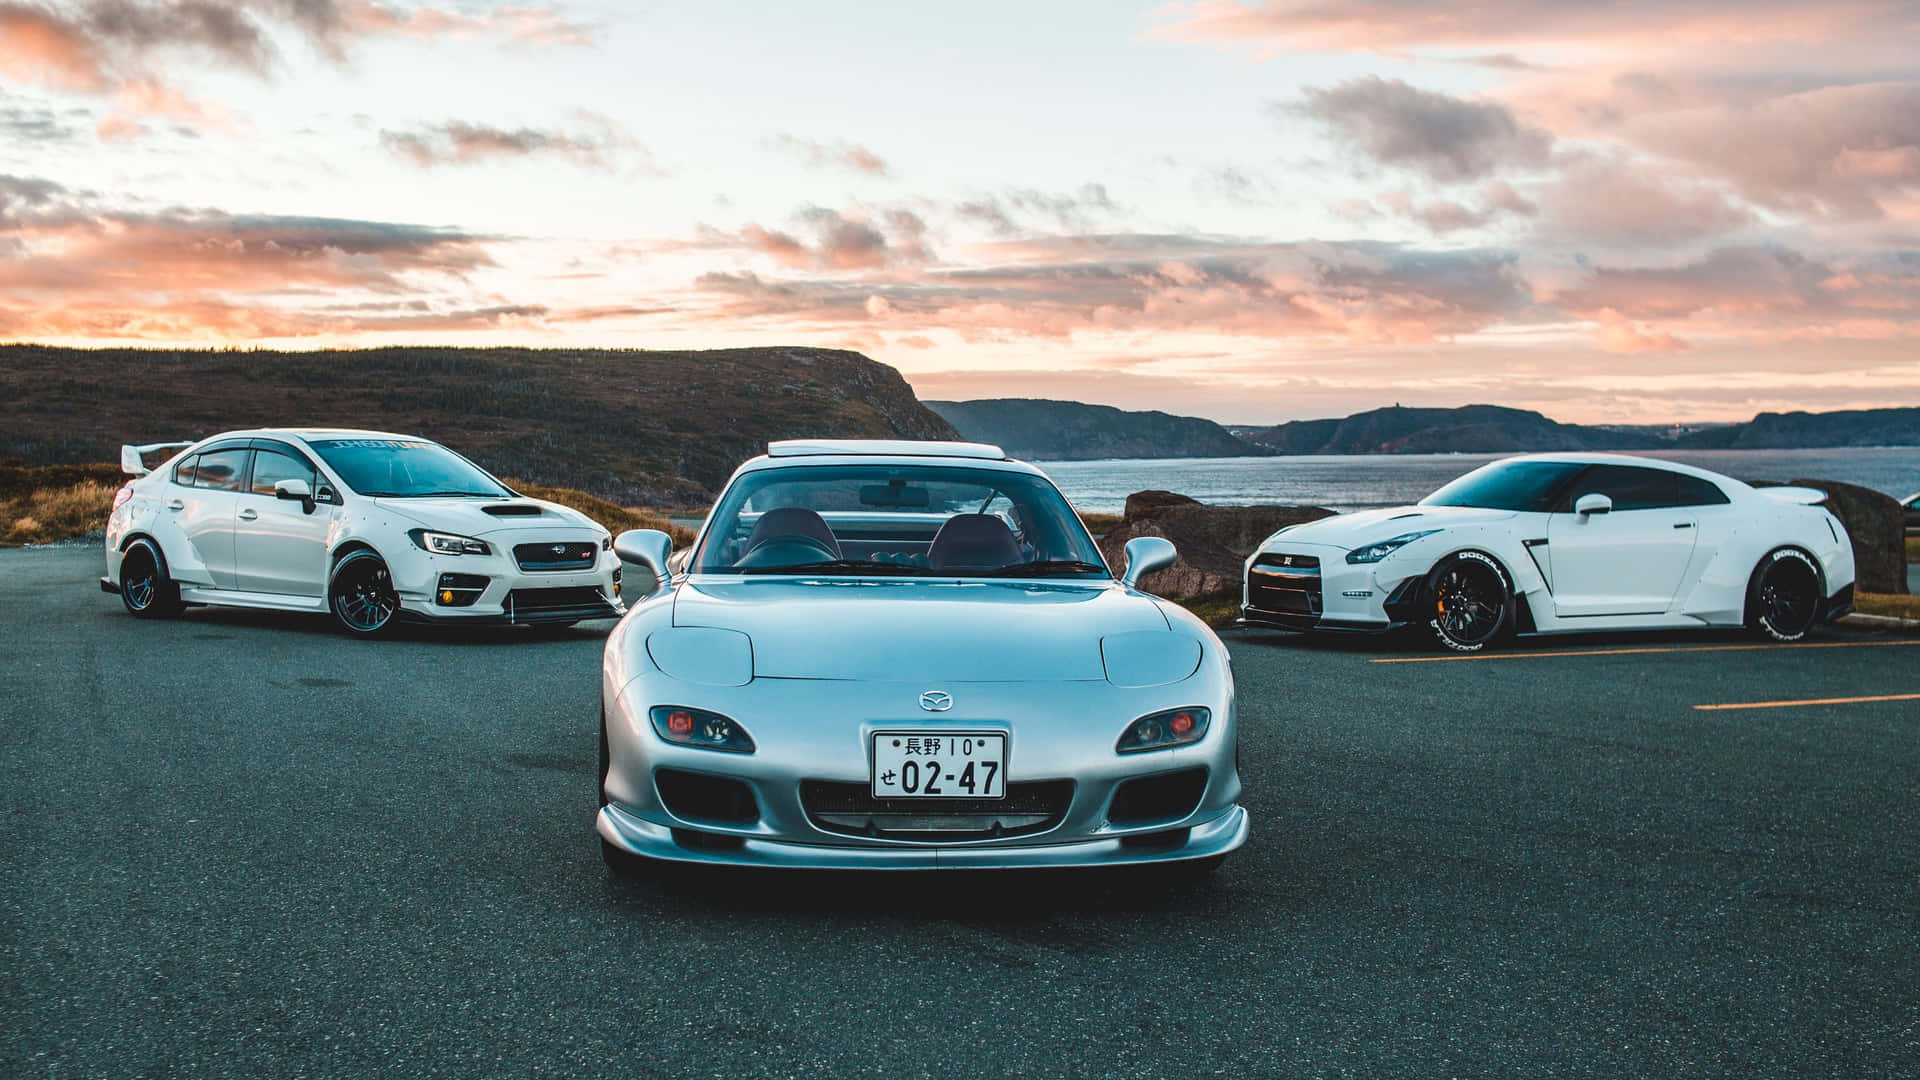 Mazda Rx 7 With Ocean View Landscape Background